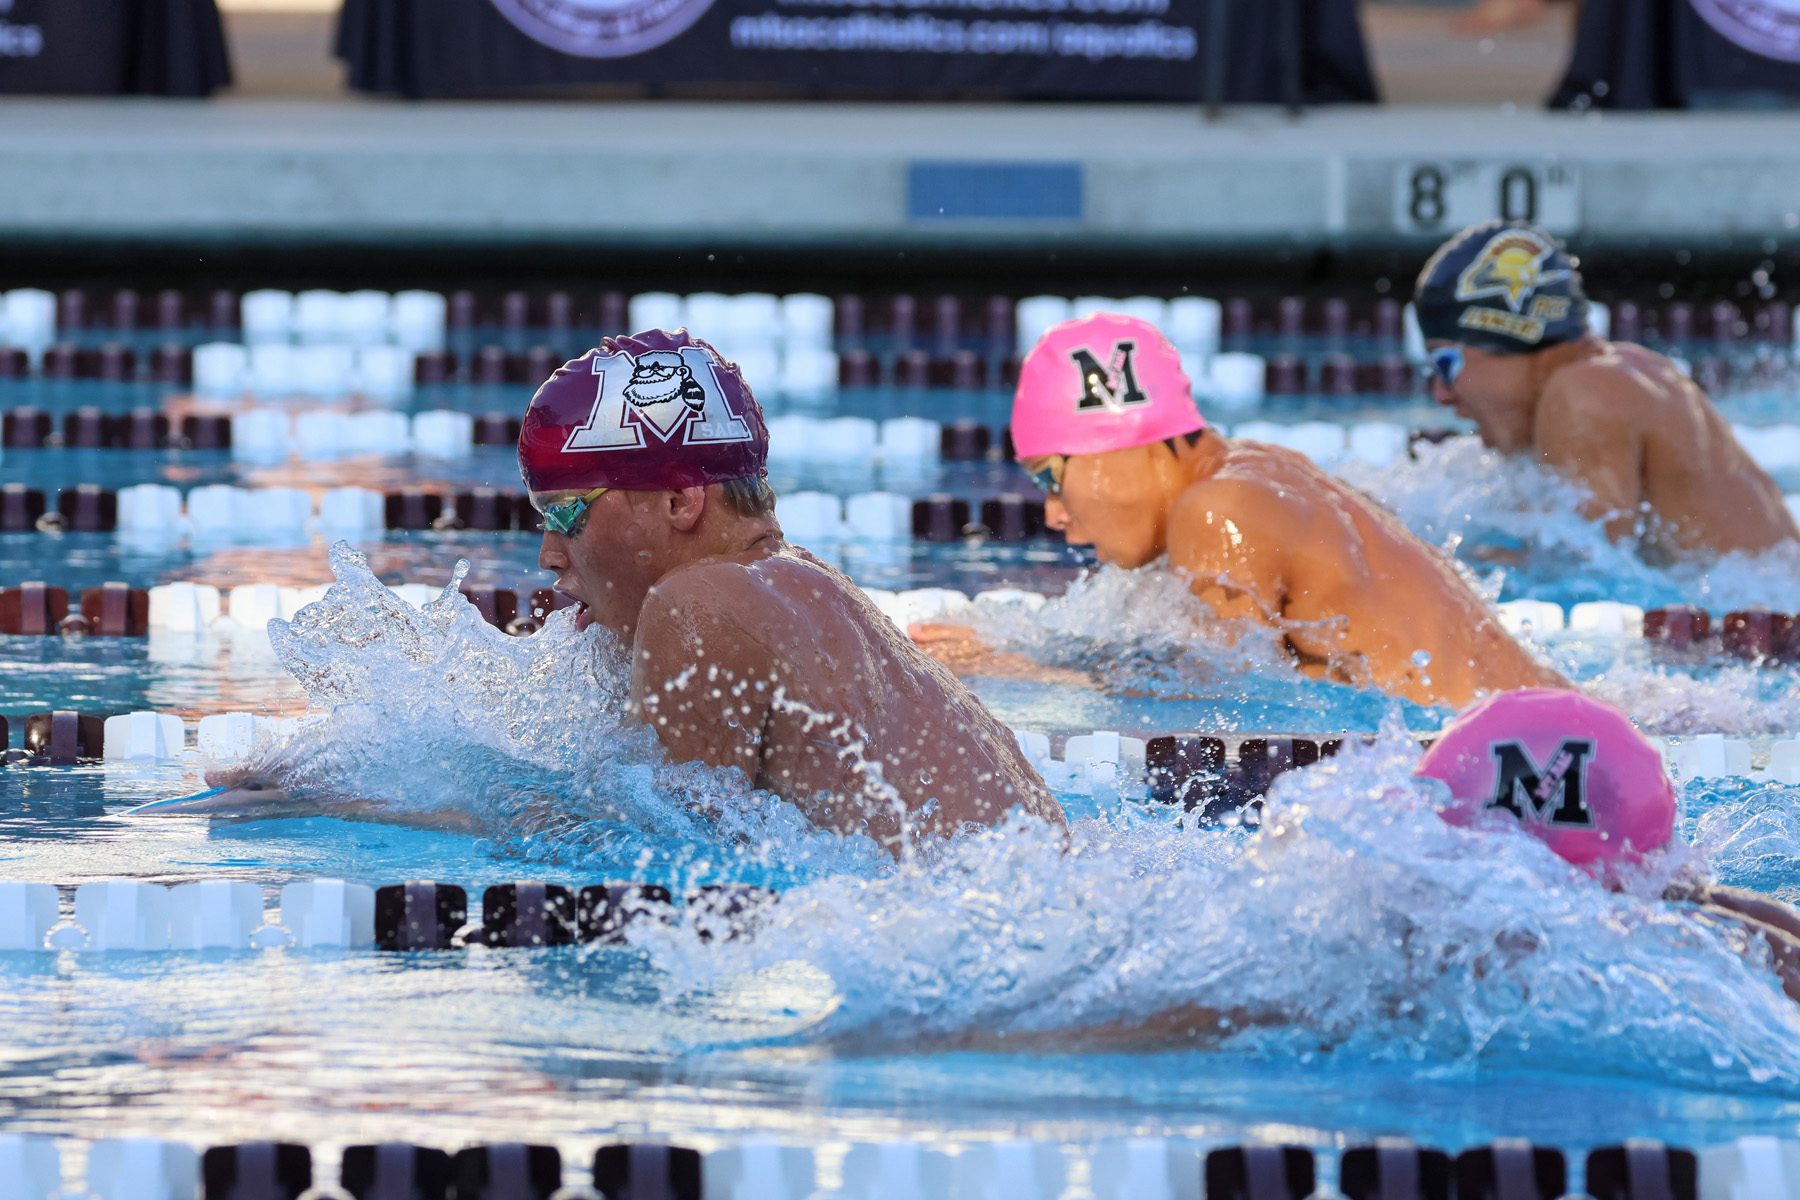 Markus Stechbuchner on his way to a win to help Mt. SAC capture the SCC men's swim team title (photo by Richard Quinton).